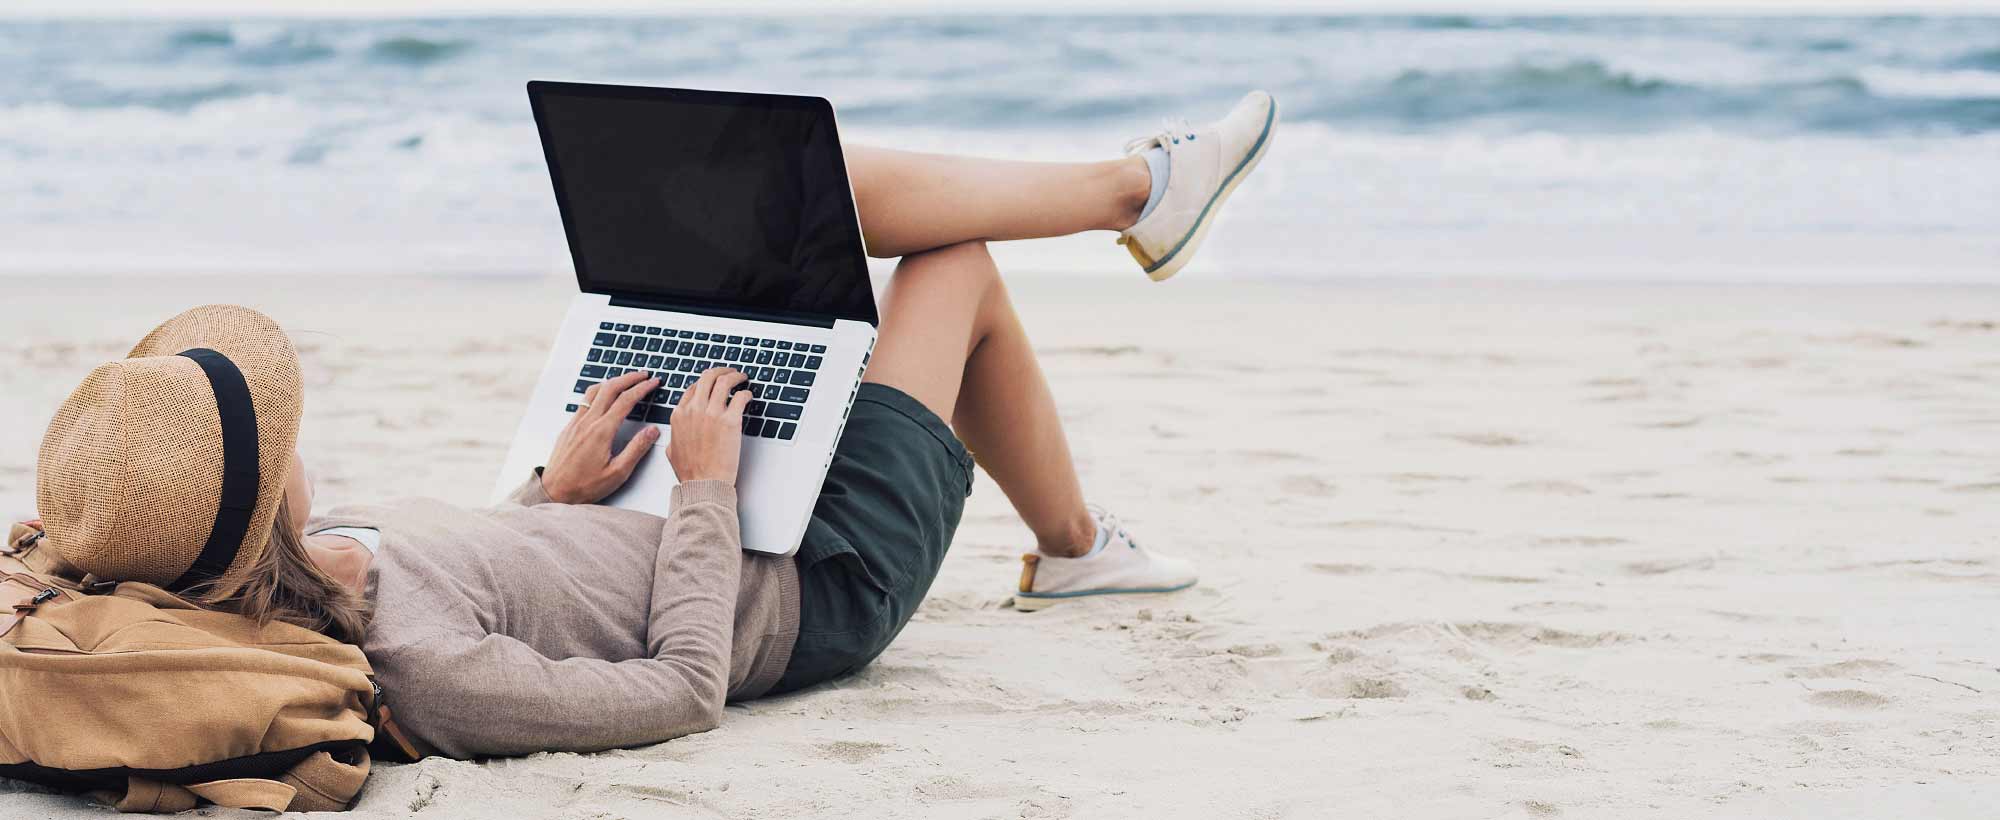 Lady relaxing on beach with laptop